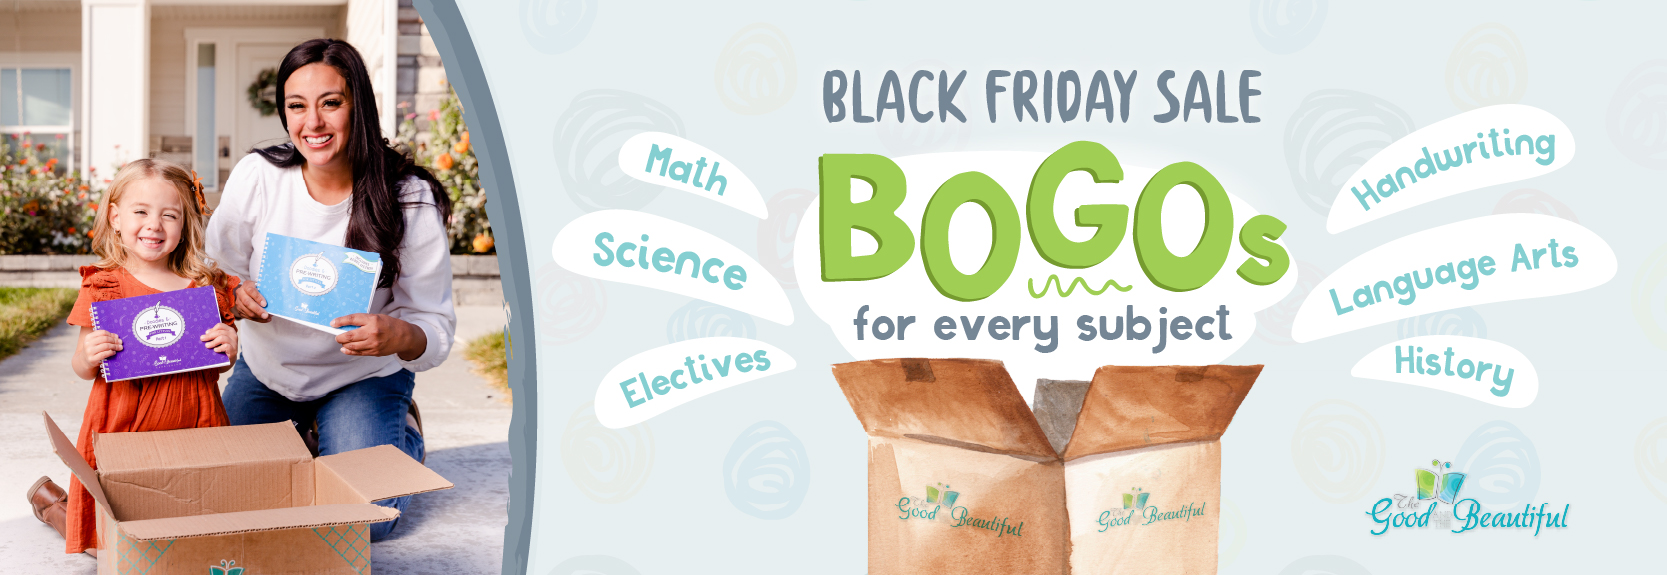  BLACK FRIDAY SALE BOGOS for everg sub Ject 